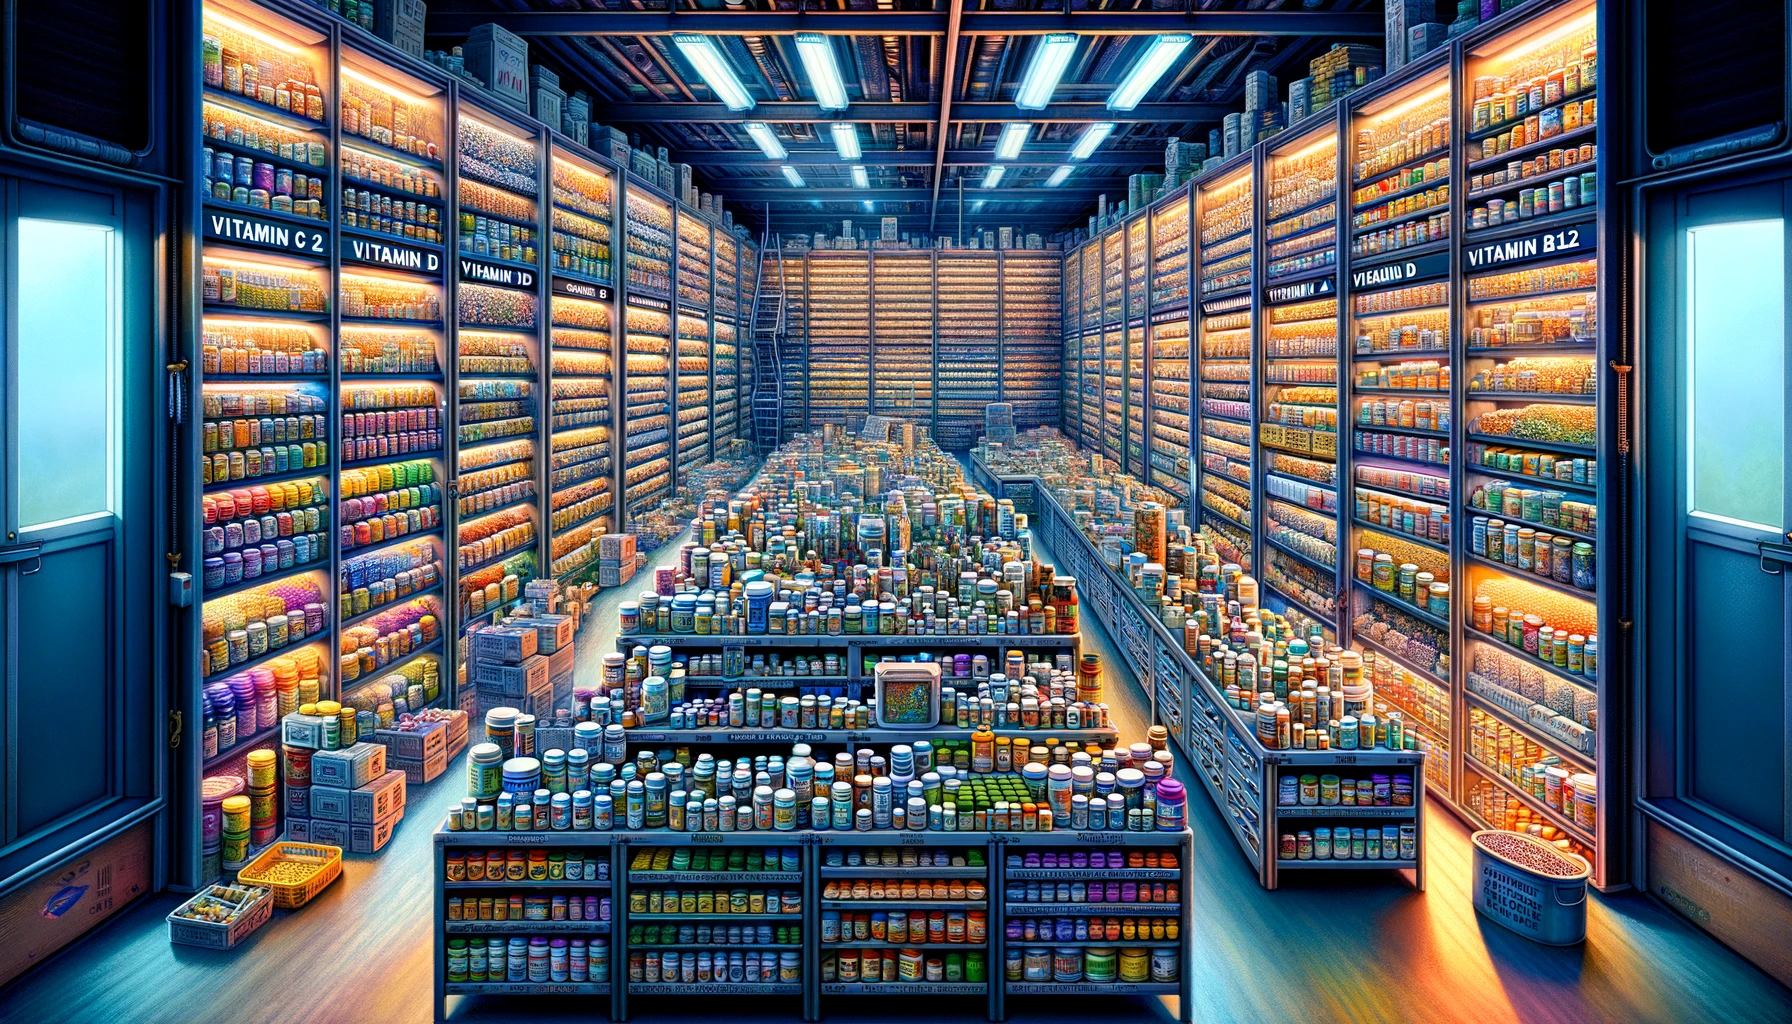 Extensive prepper's storage facility showcasing essential vitamins for emergency readiness, divided into sections for key vitamins like C, D, B12, with natural sources and supplements, labeled by symbols, featuring advanced storage solutions, embodying strategic selection and preservation for survival